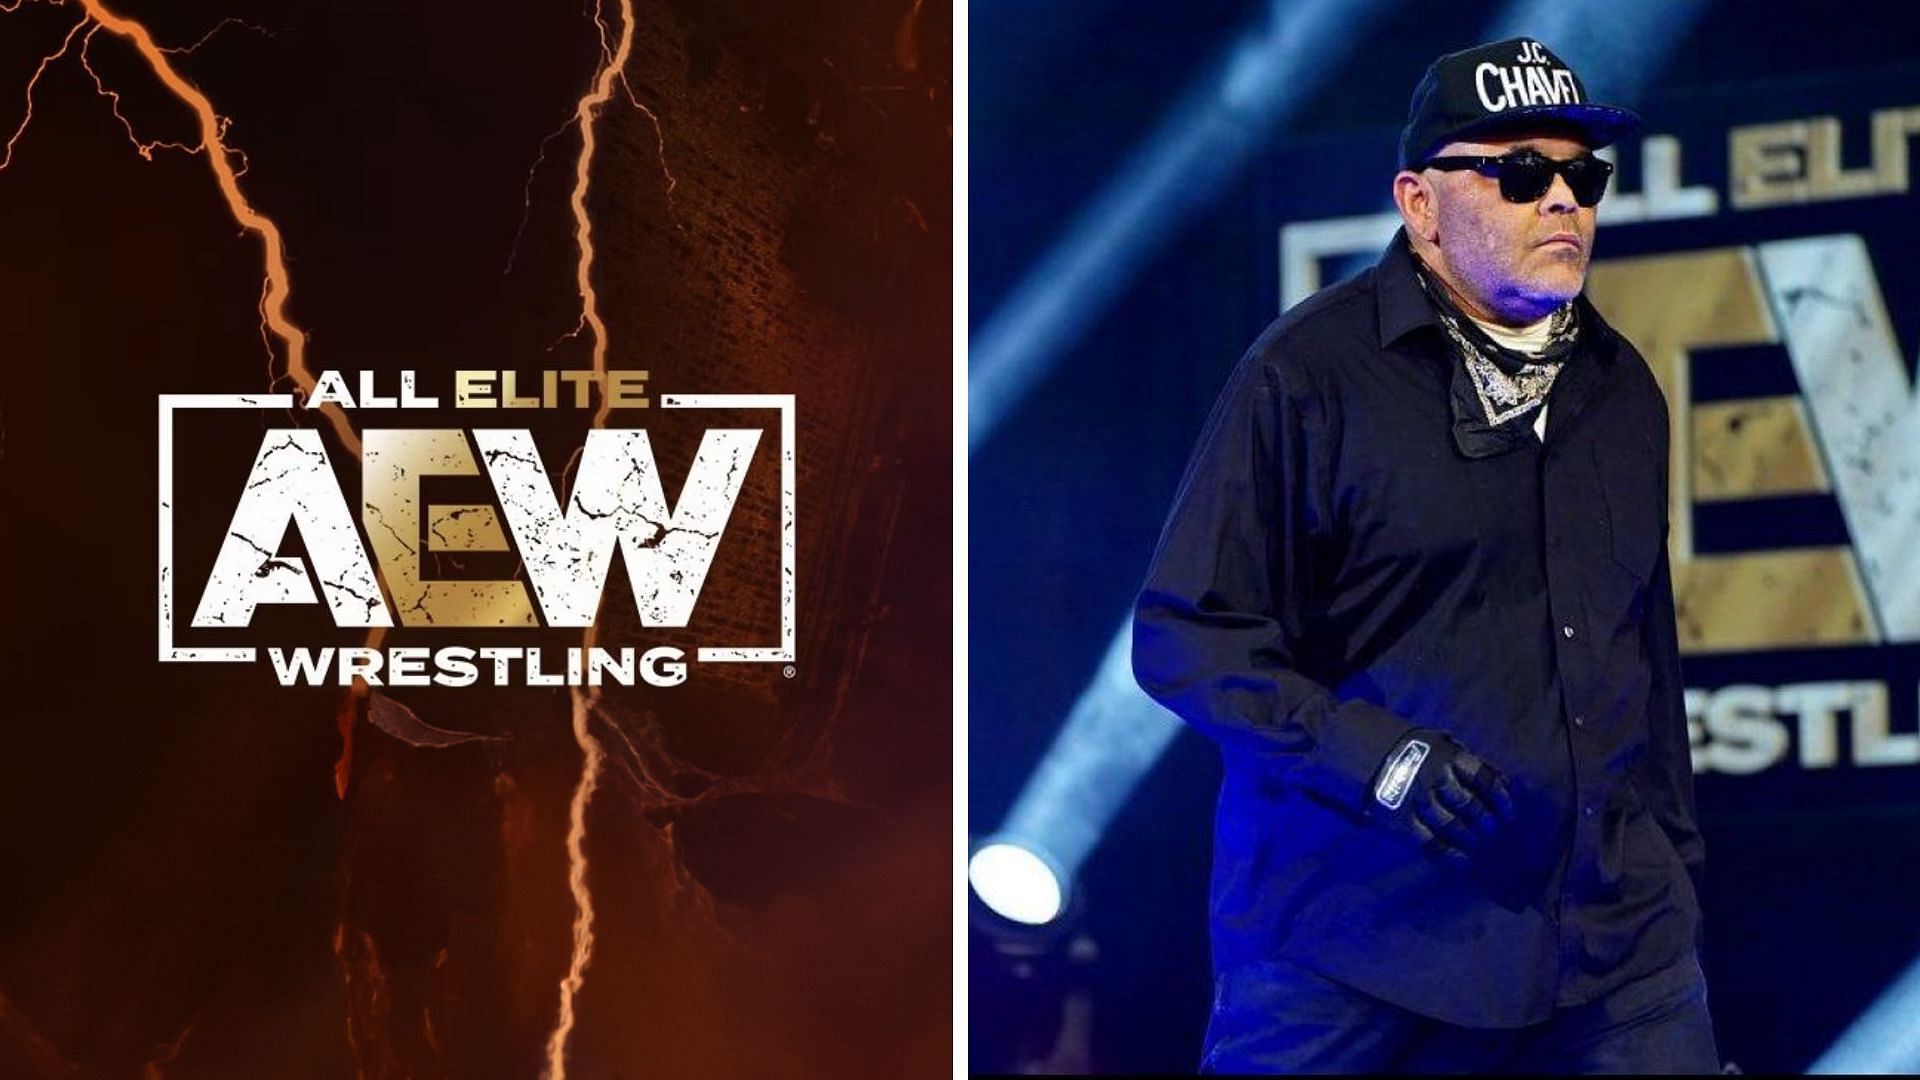 Konnan has appeared for AEW in the past